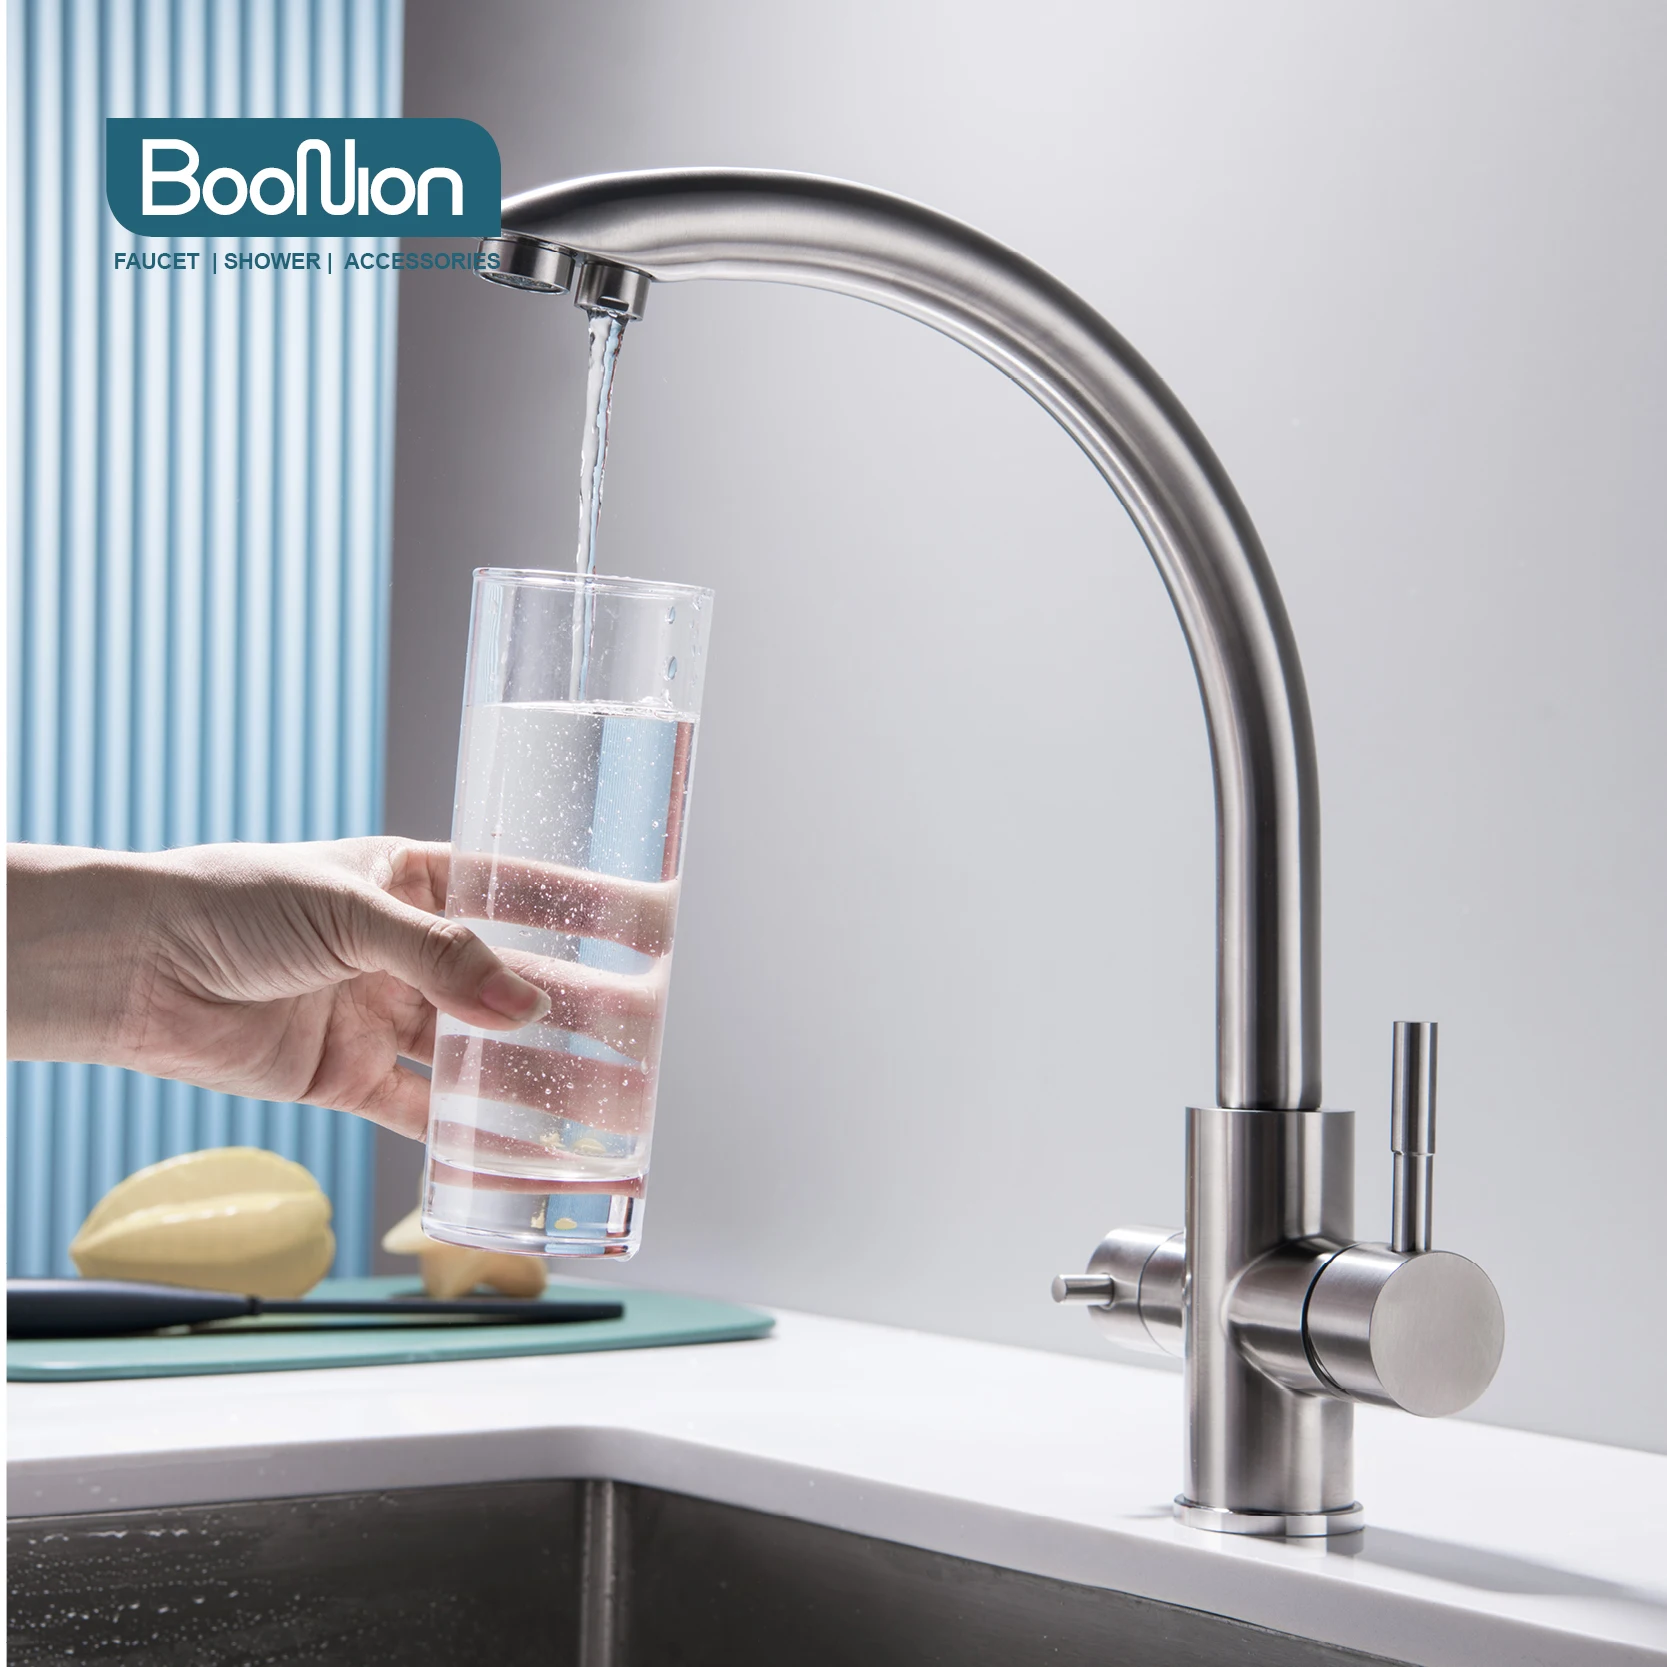 

Boonion SUS304 Stainless steel kitchen faucet Hot and cold faucet Clean water Direct drinking faucet Pull Food kitchen faucet